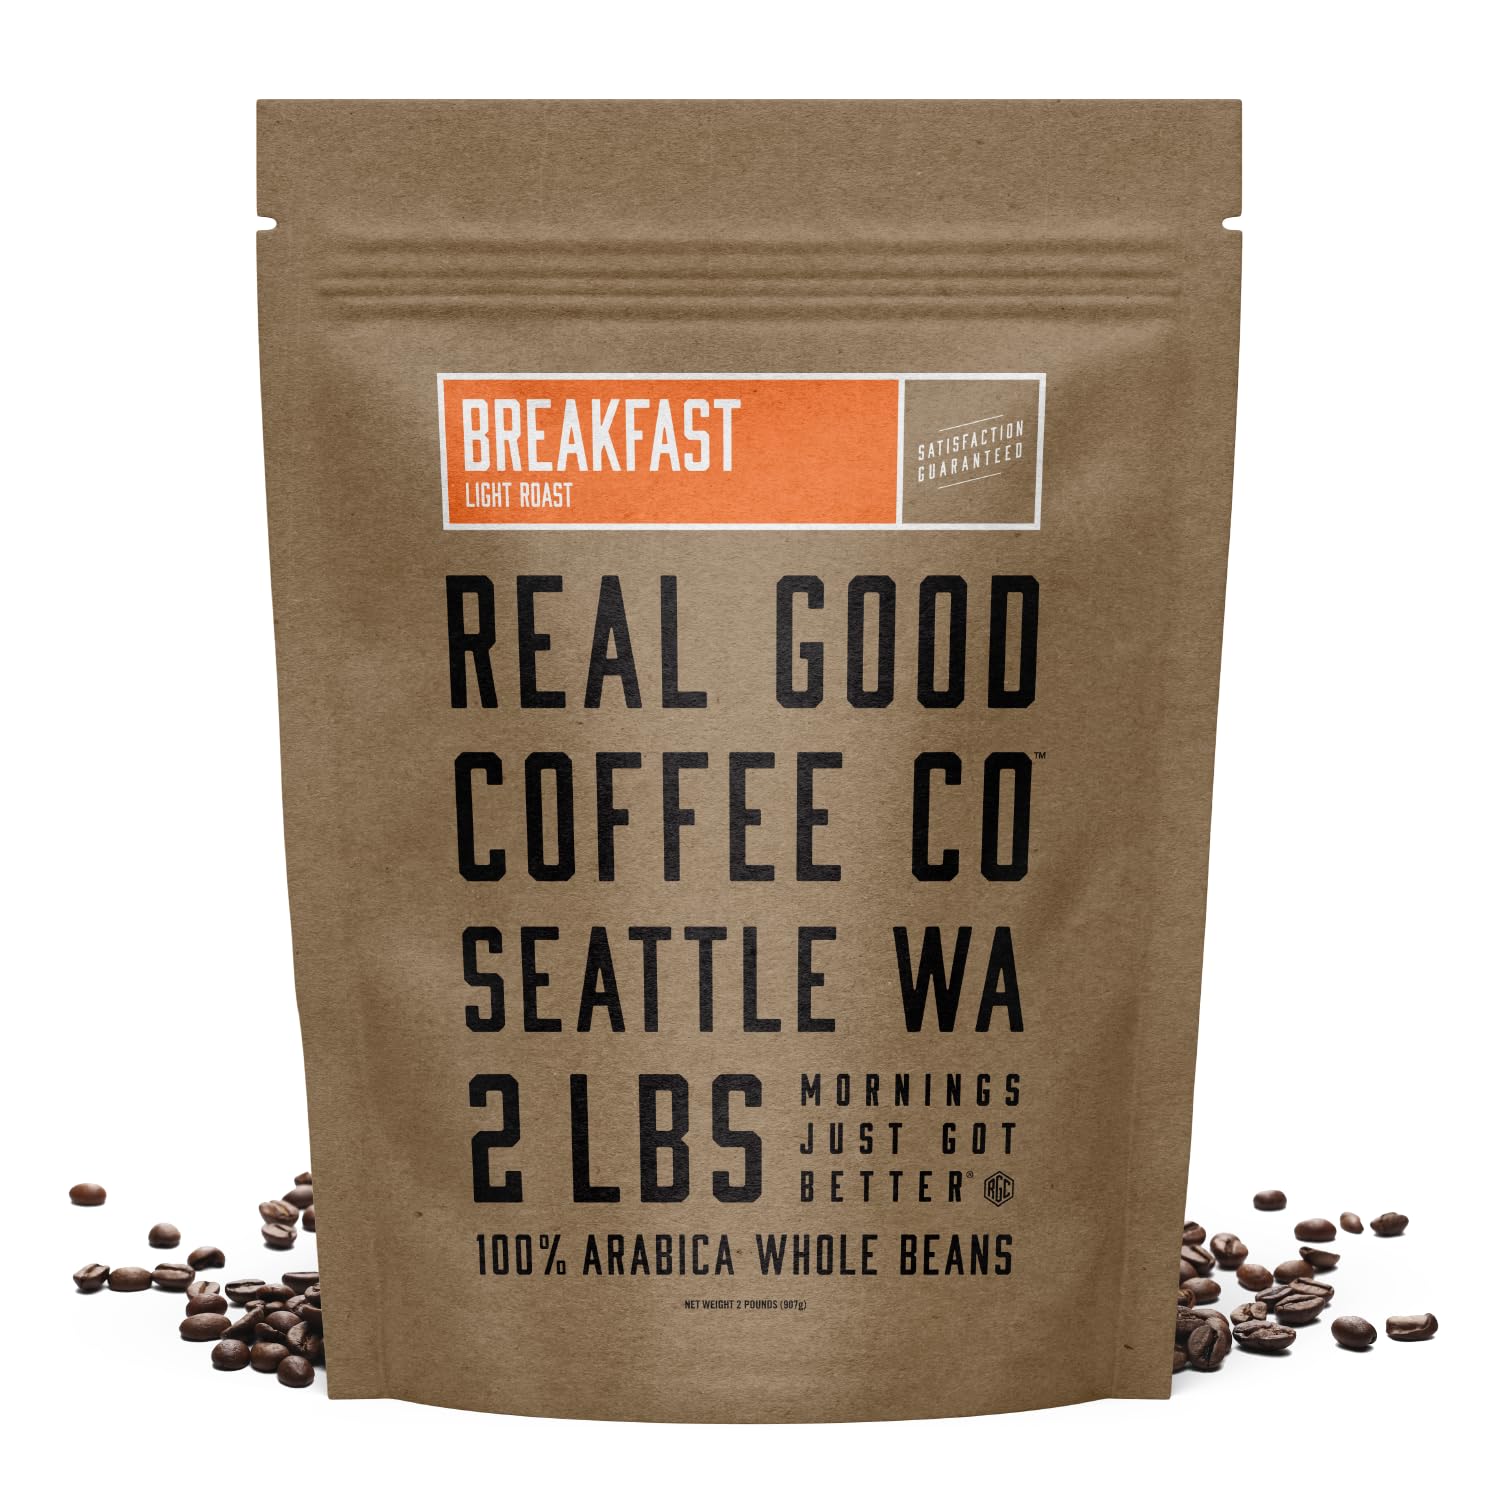 Real Good Coffee Company - Whole Bean Coffee - Breakfast Blend Light Roast Coffee Beans - Bag - 100% Whole Arabica Beans - Grind at Home, Brew How You Like